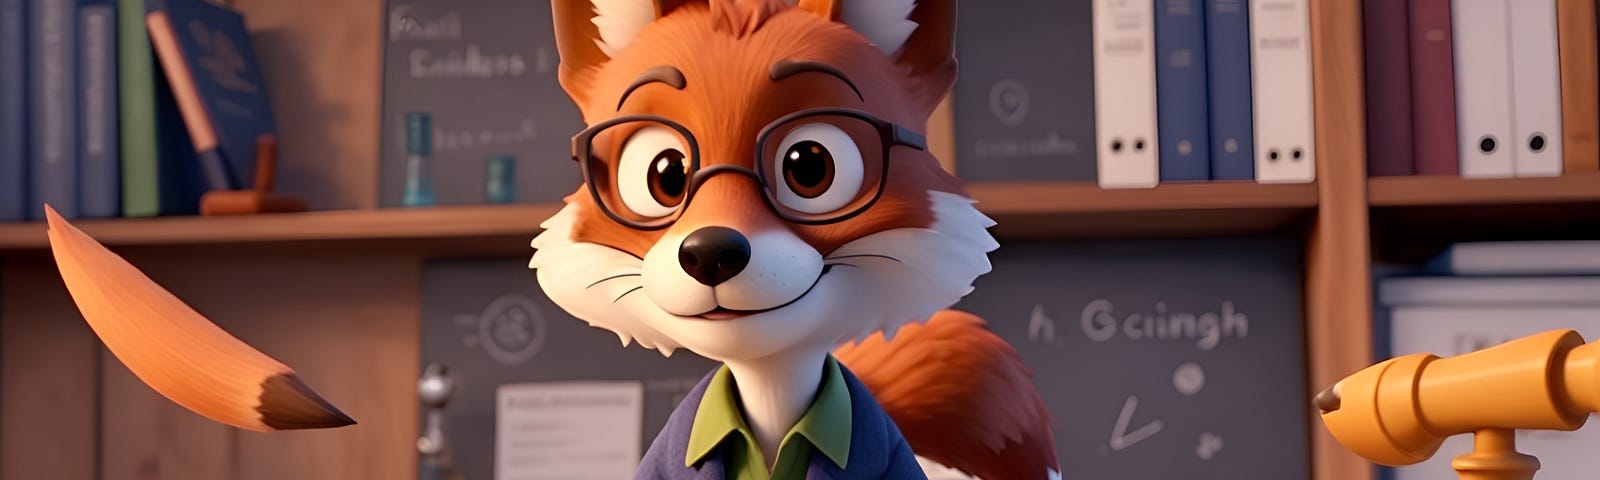 An AI-generated fox in the style of a Pixar 3D animation, wearing a navy-blue jacket with the sleeves rolled up, a green shirt, sitting at a desk in a research office. Beakers on the desk, books and folders on shelves behind him, and he’s resting his hands on a book open on the desk in front of him.